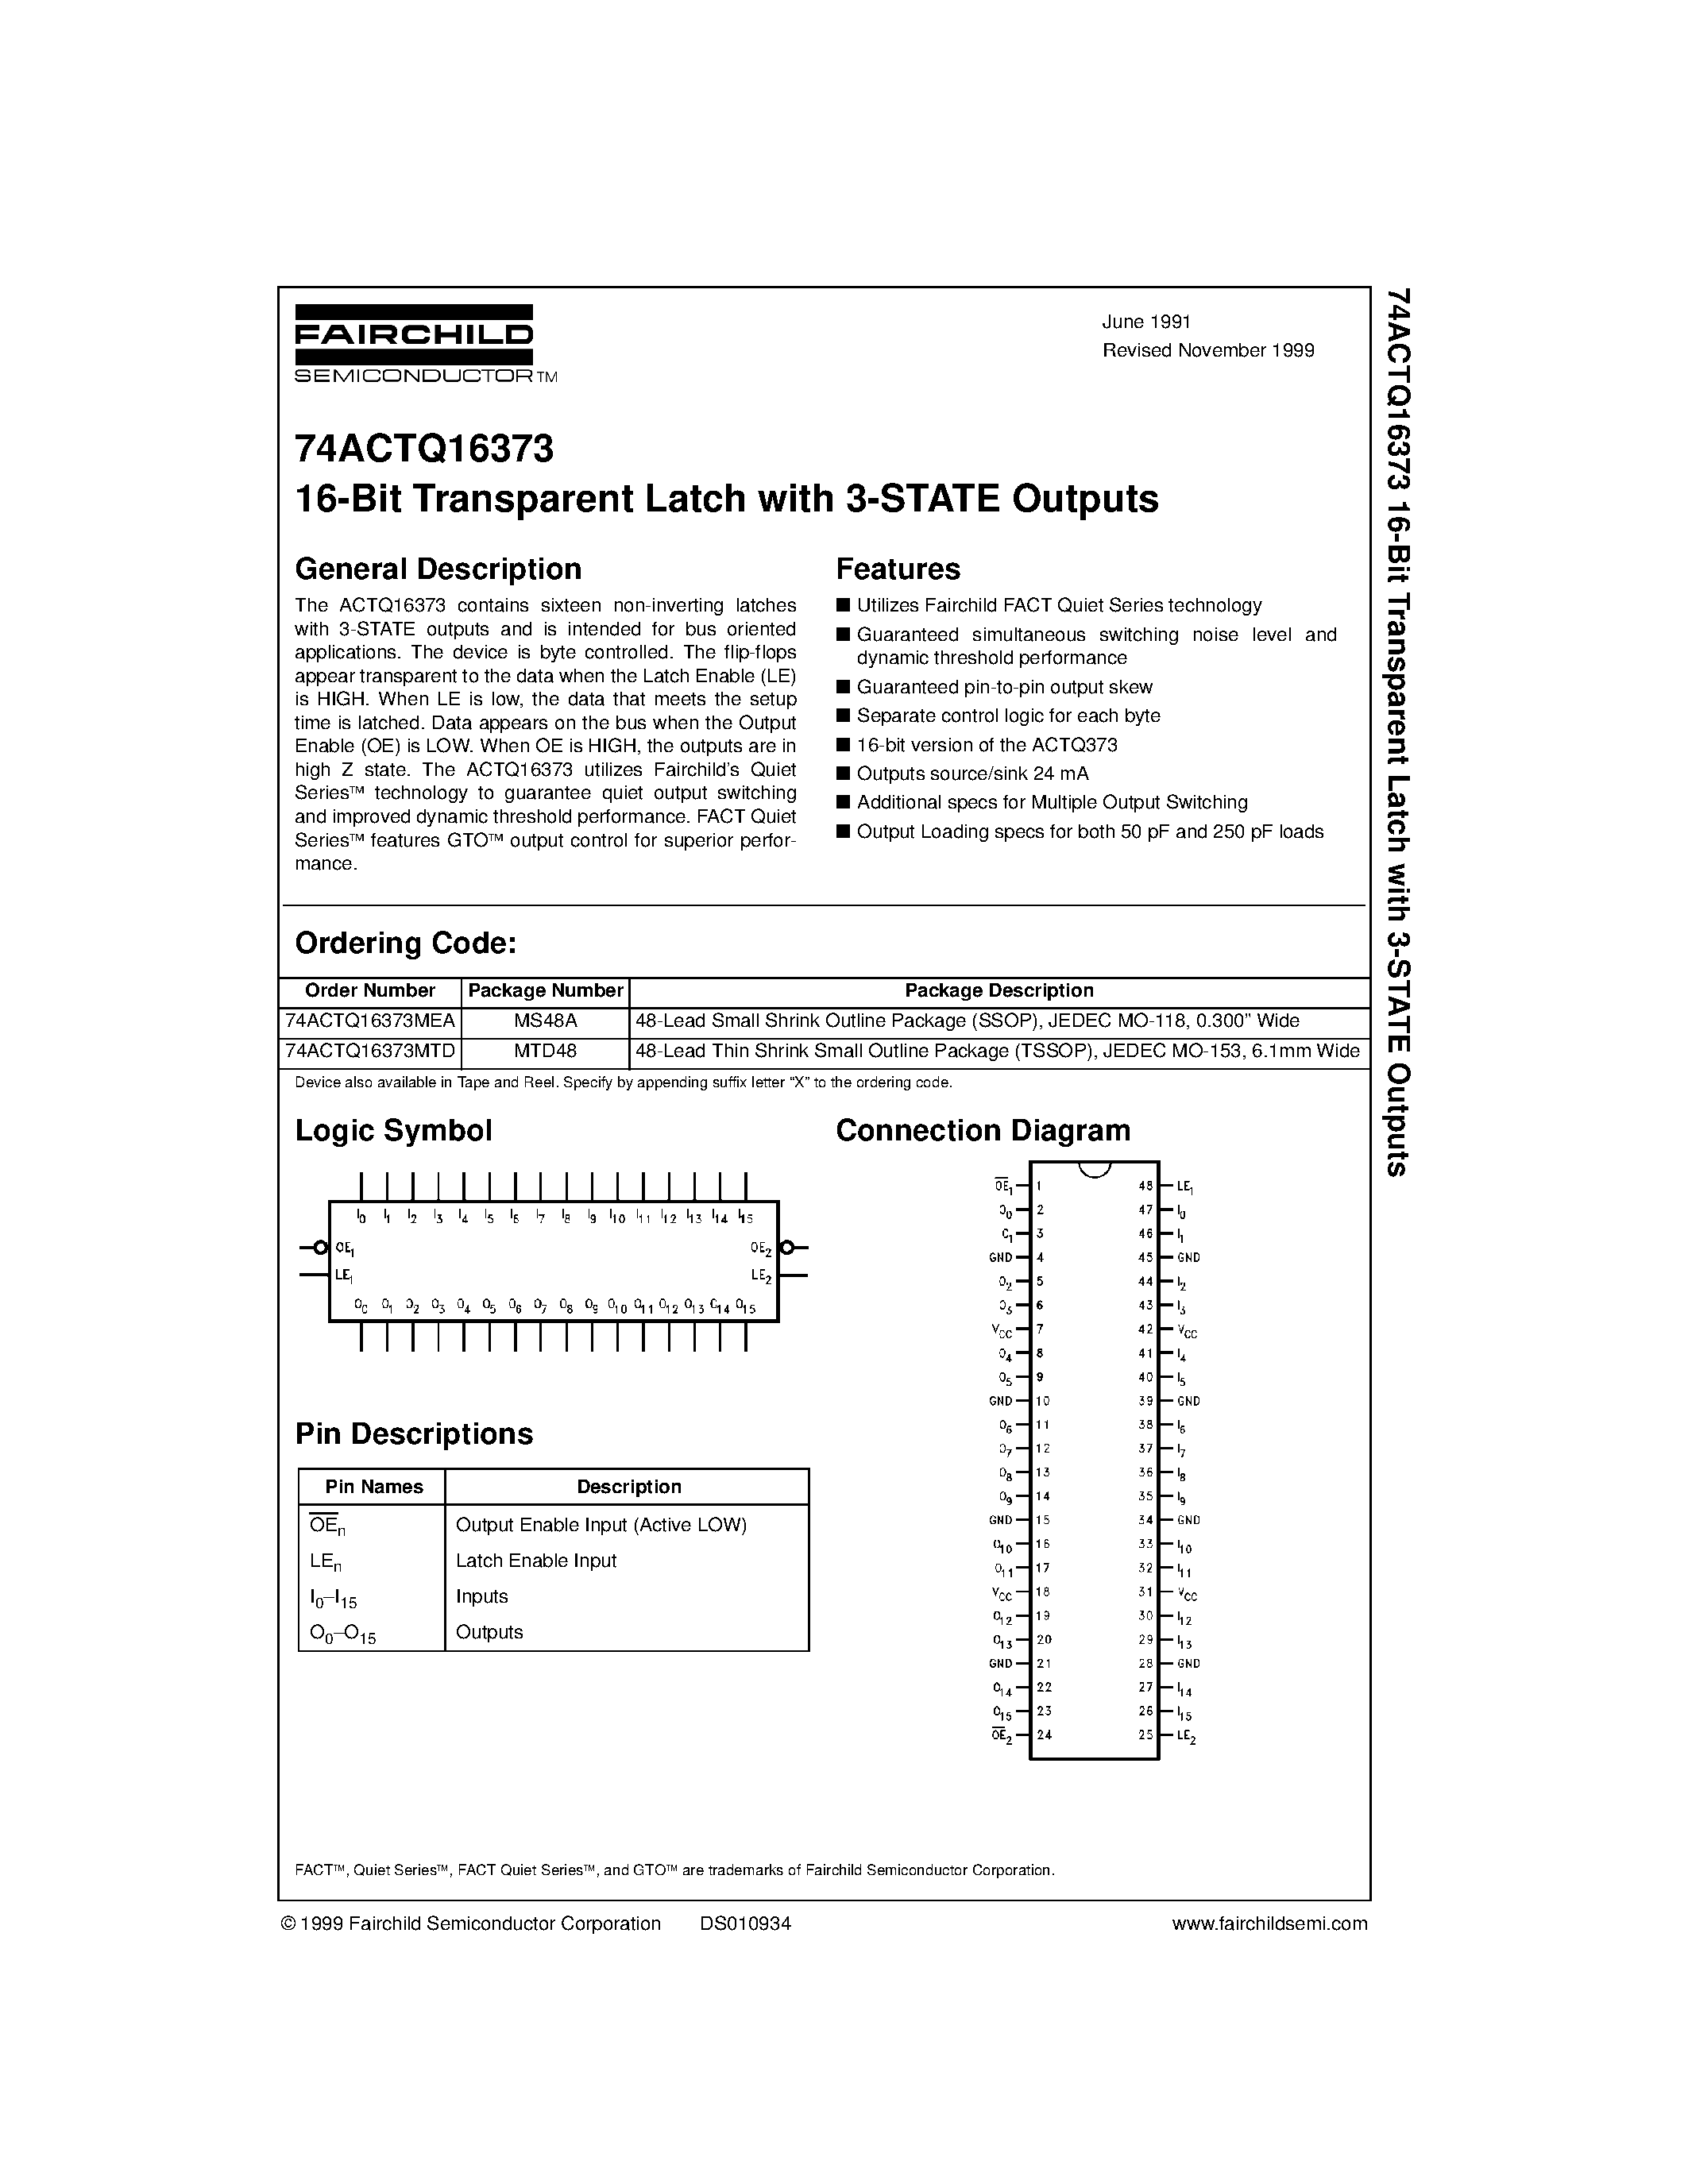 Datasheet 74ACTQ16373MEA - 16-Bit Transparent Latch with 3-STATE Outputs page 1